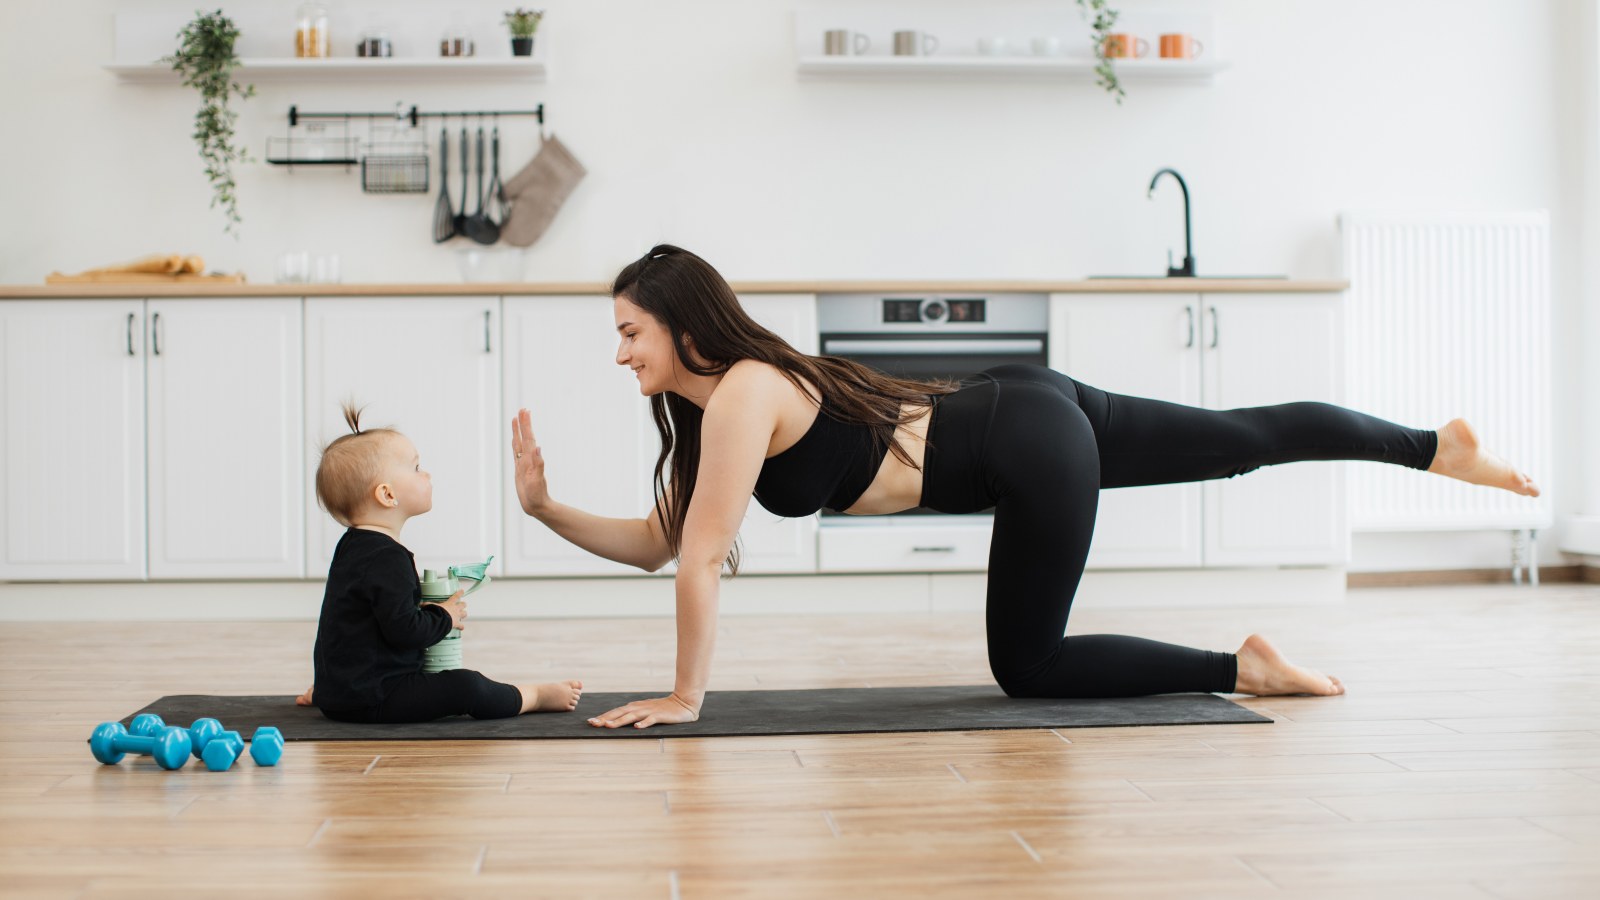 11 best postpartum yoga poses for recovery